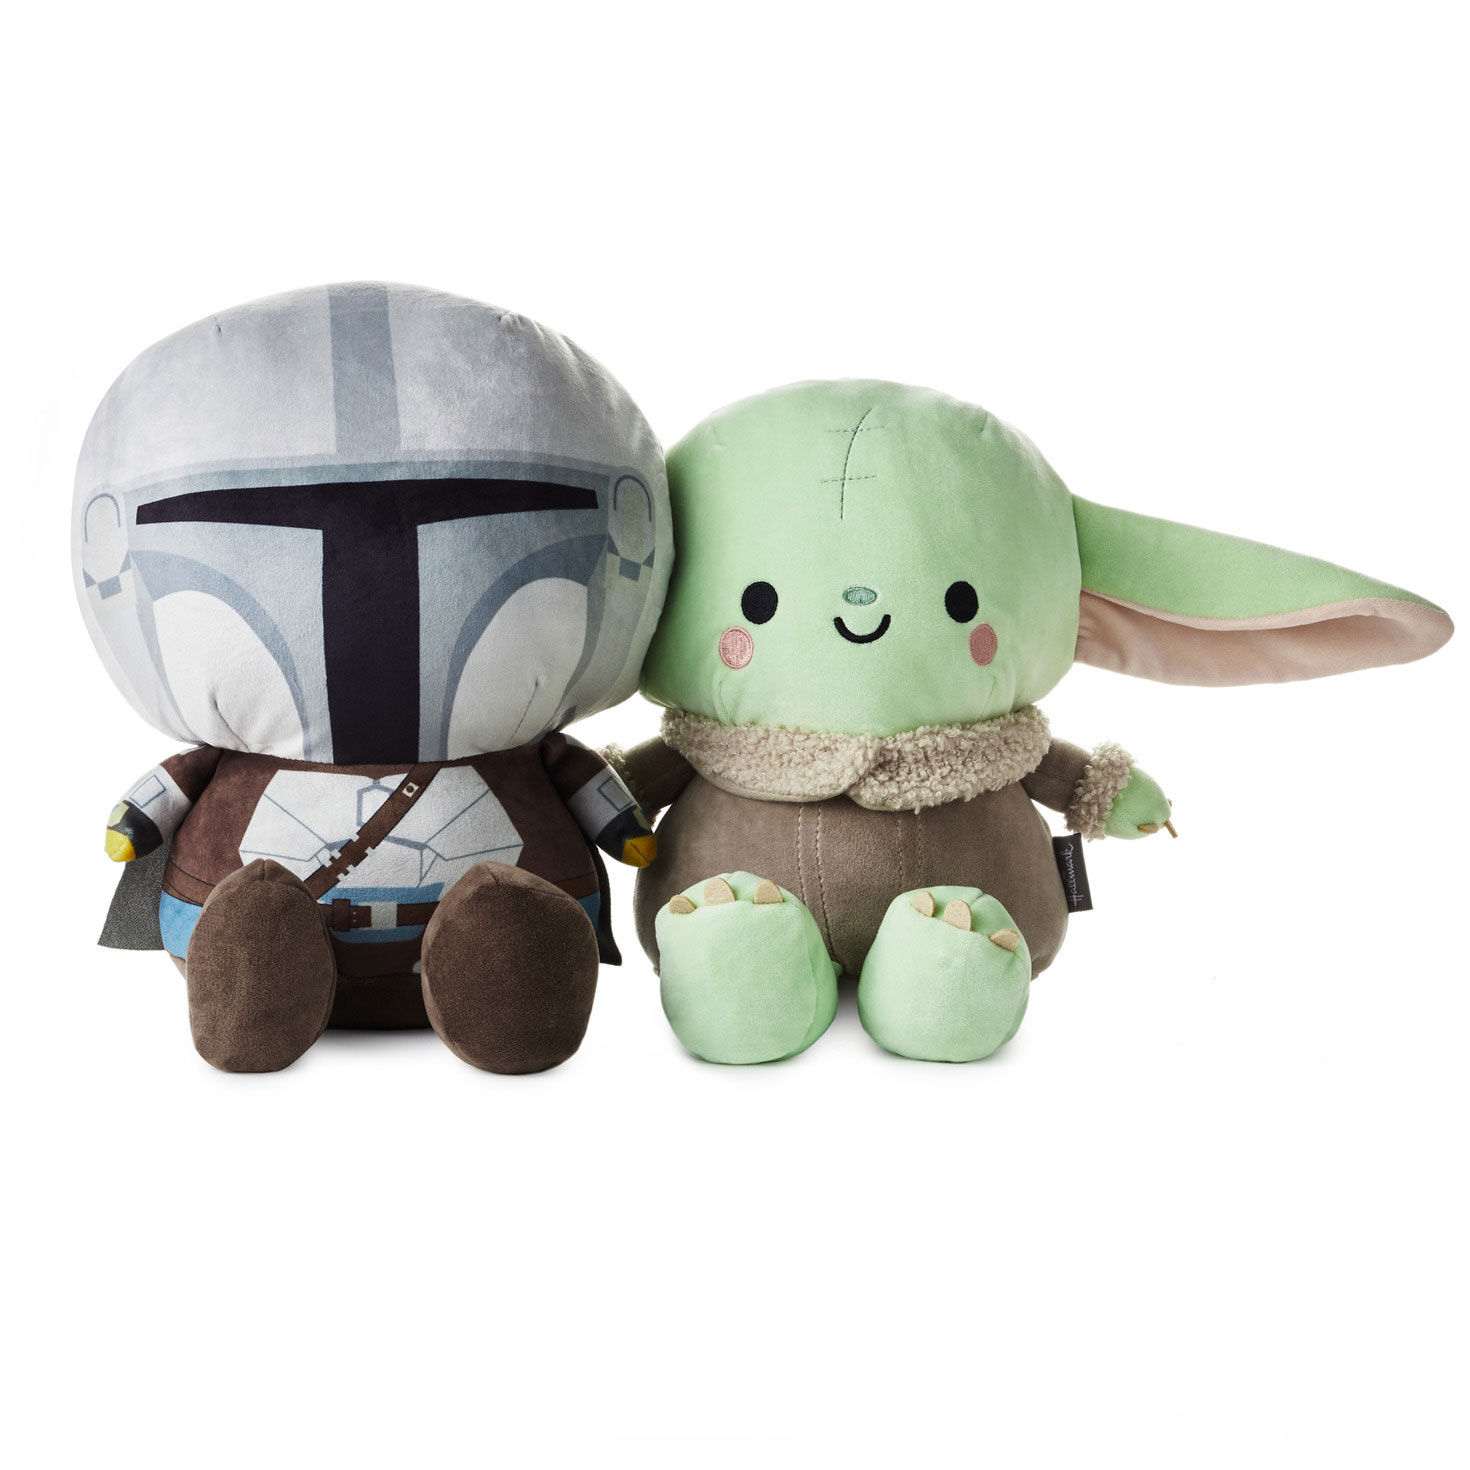 Large Better Together Star Wars: The Mandalorian™ and Grogu™ Magnetic Plush Pair, 10.5" for only USD 39.99 | Hallmark